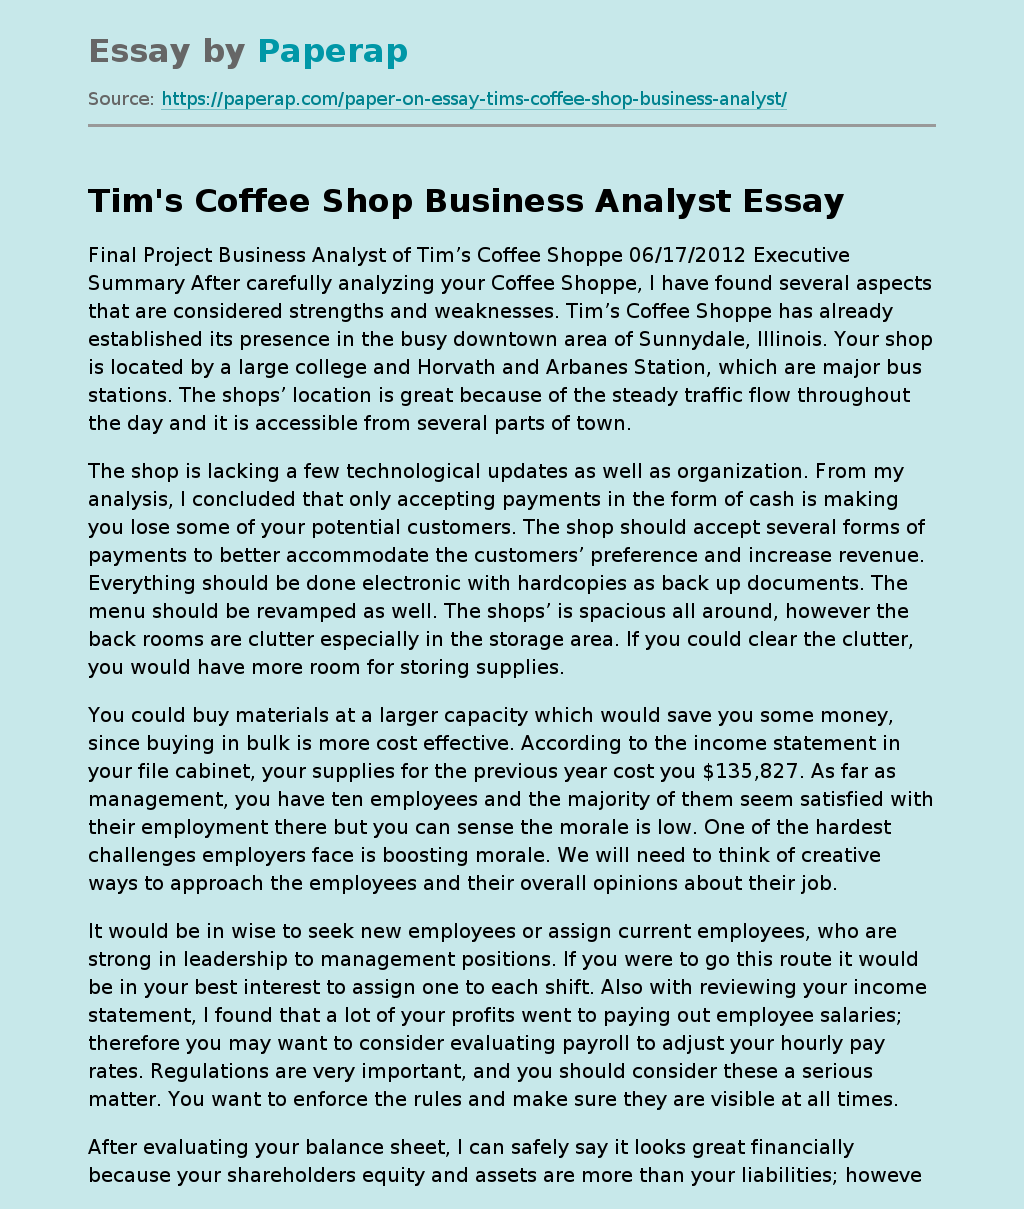 Final Project Business Analyst of Tim’s Coffee Shoppe